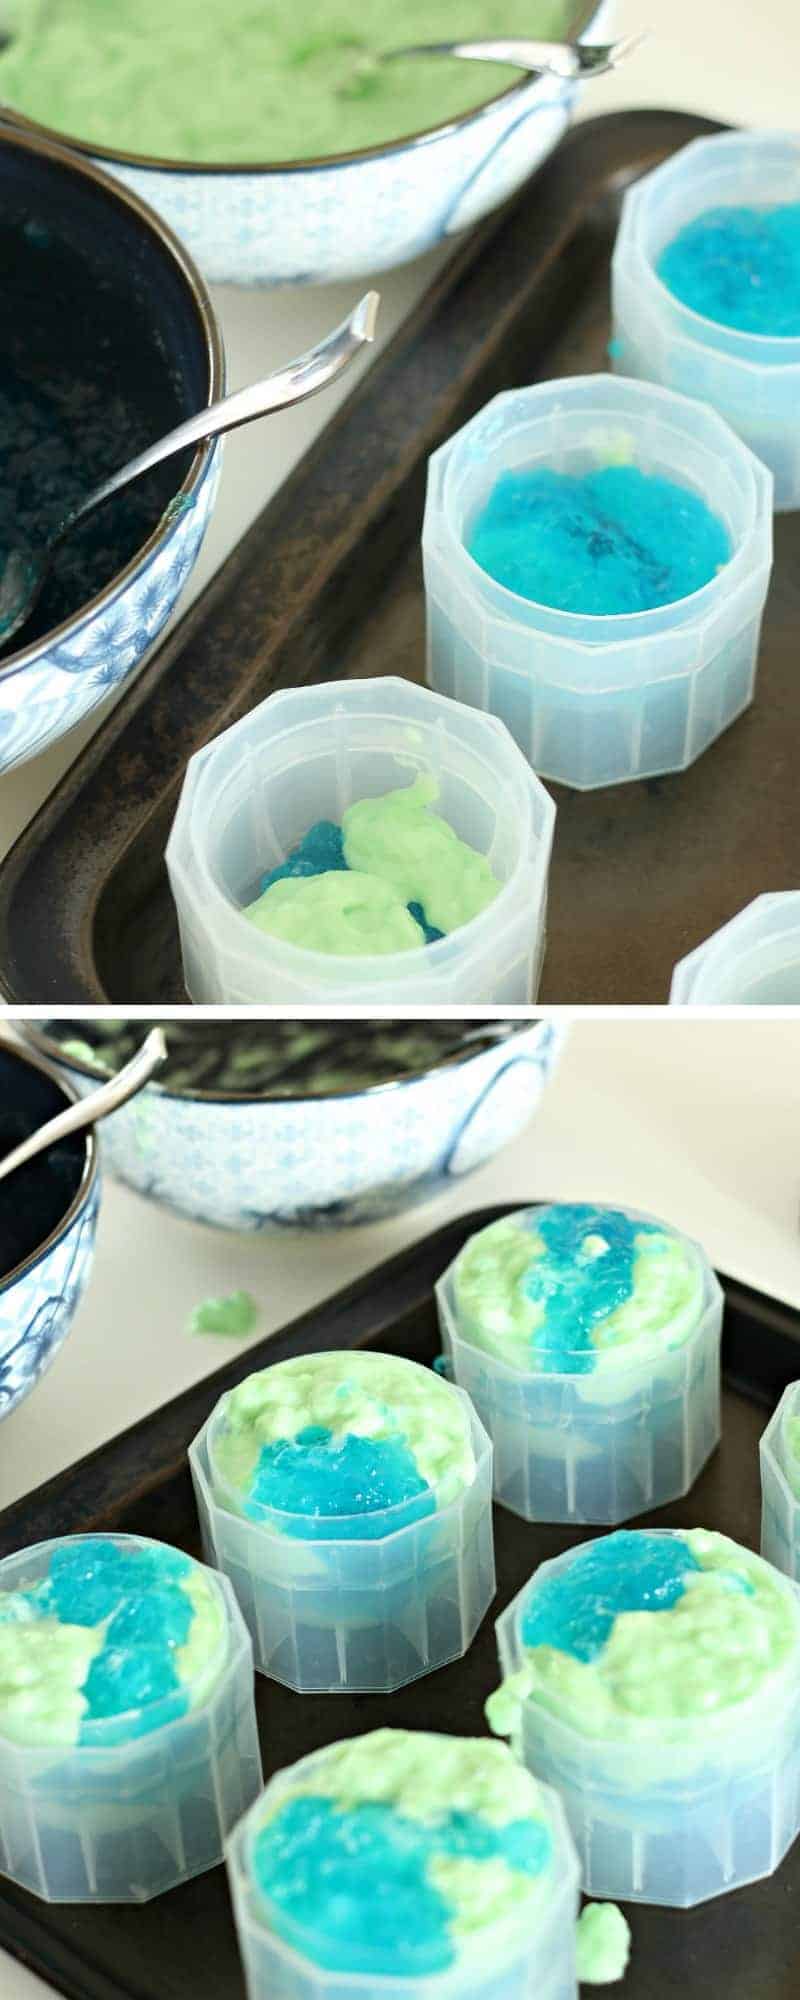 Filling the jello ball molds with green and blue jello